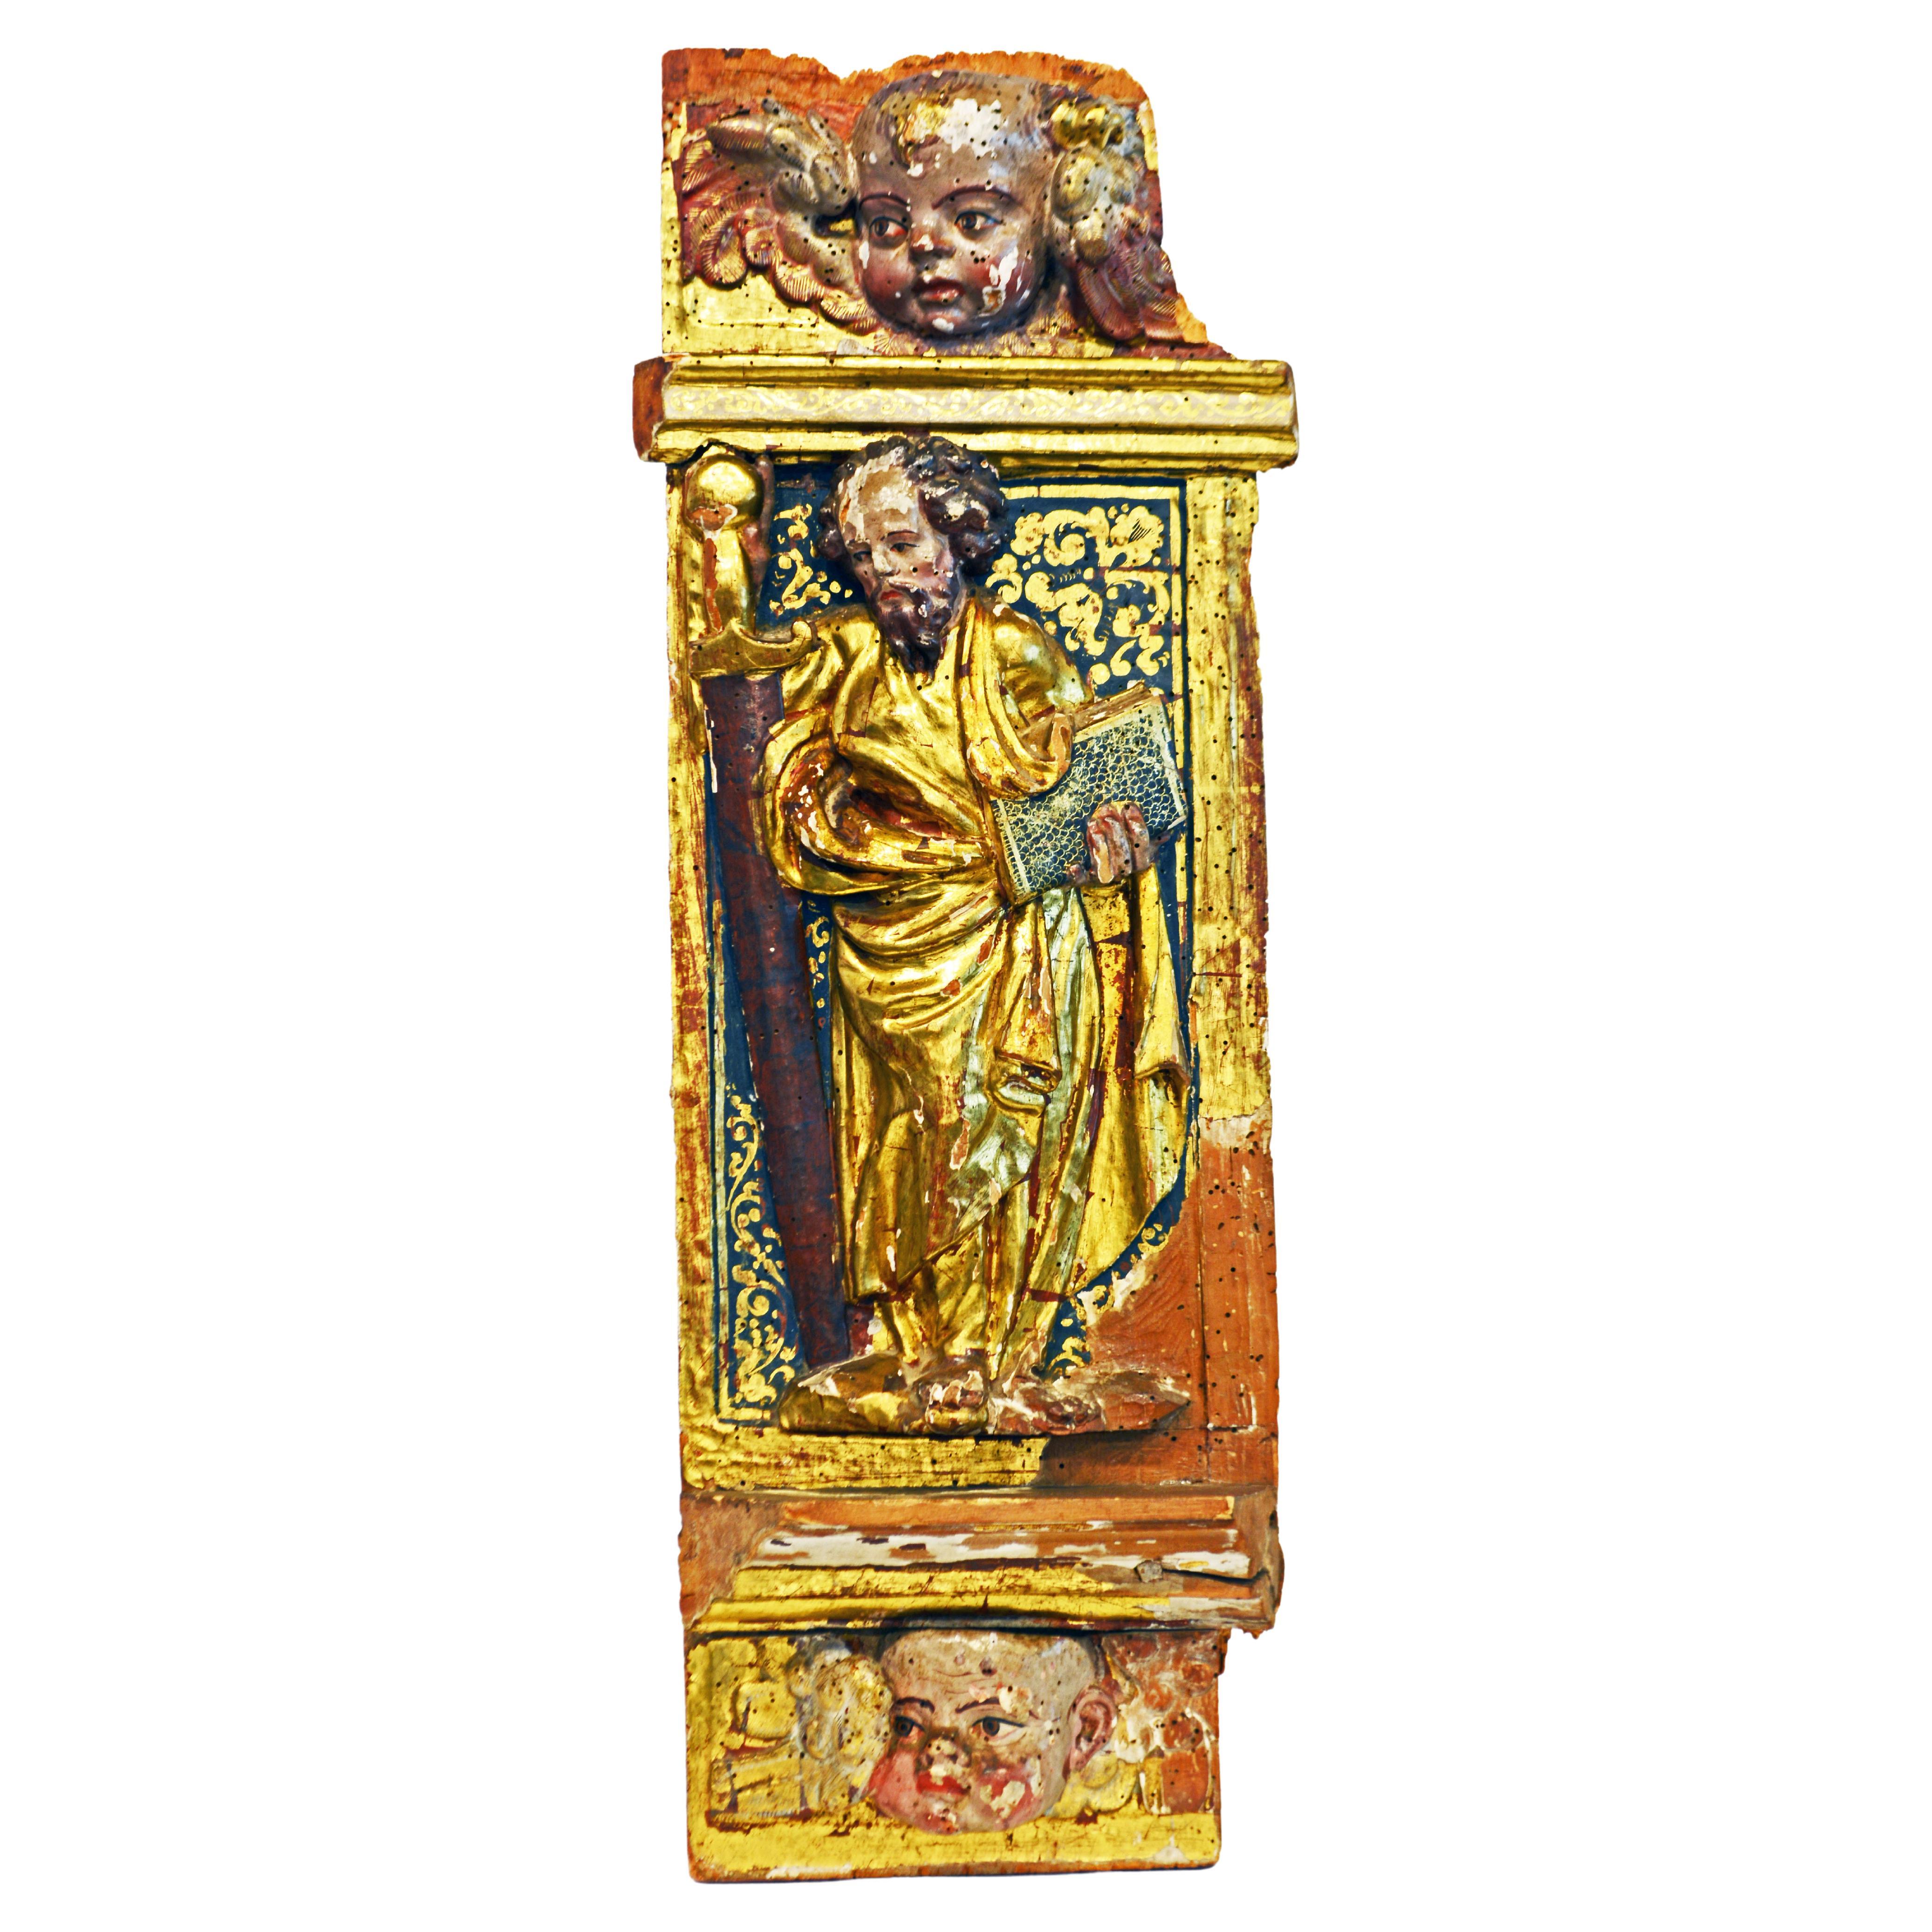 17th/18th Cent. Italian Baroque Carved Relief Fragment of the Apostle St. Paul